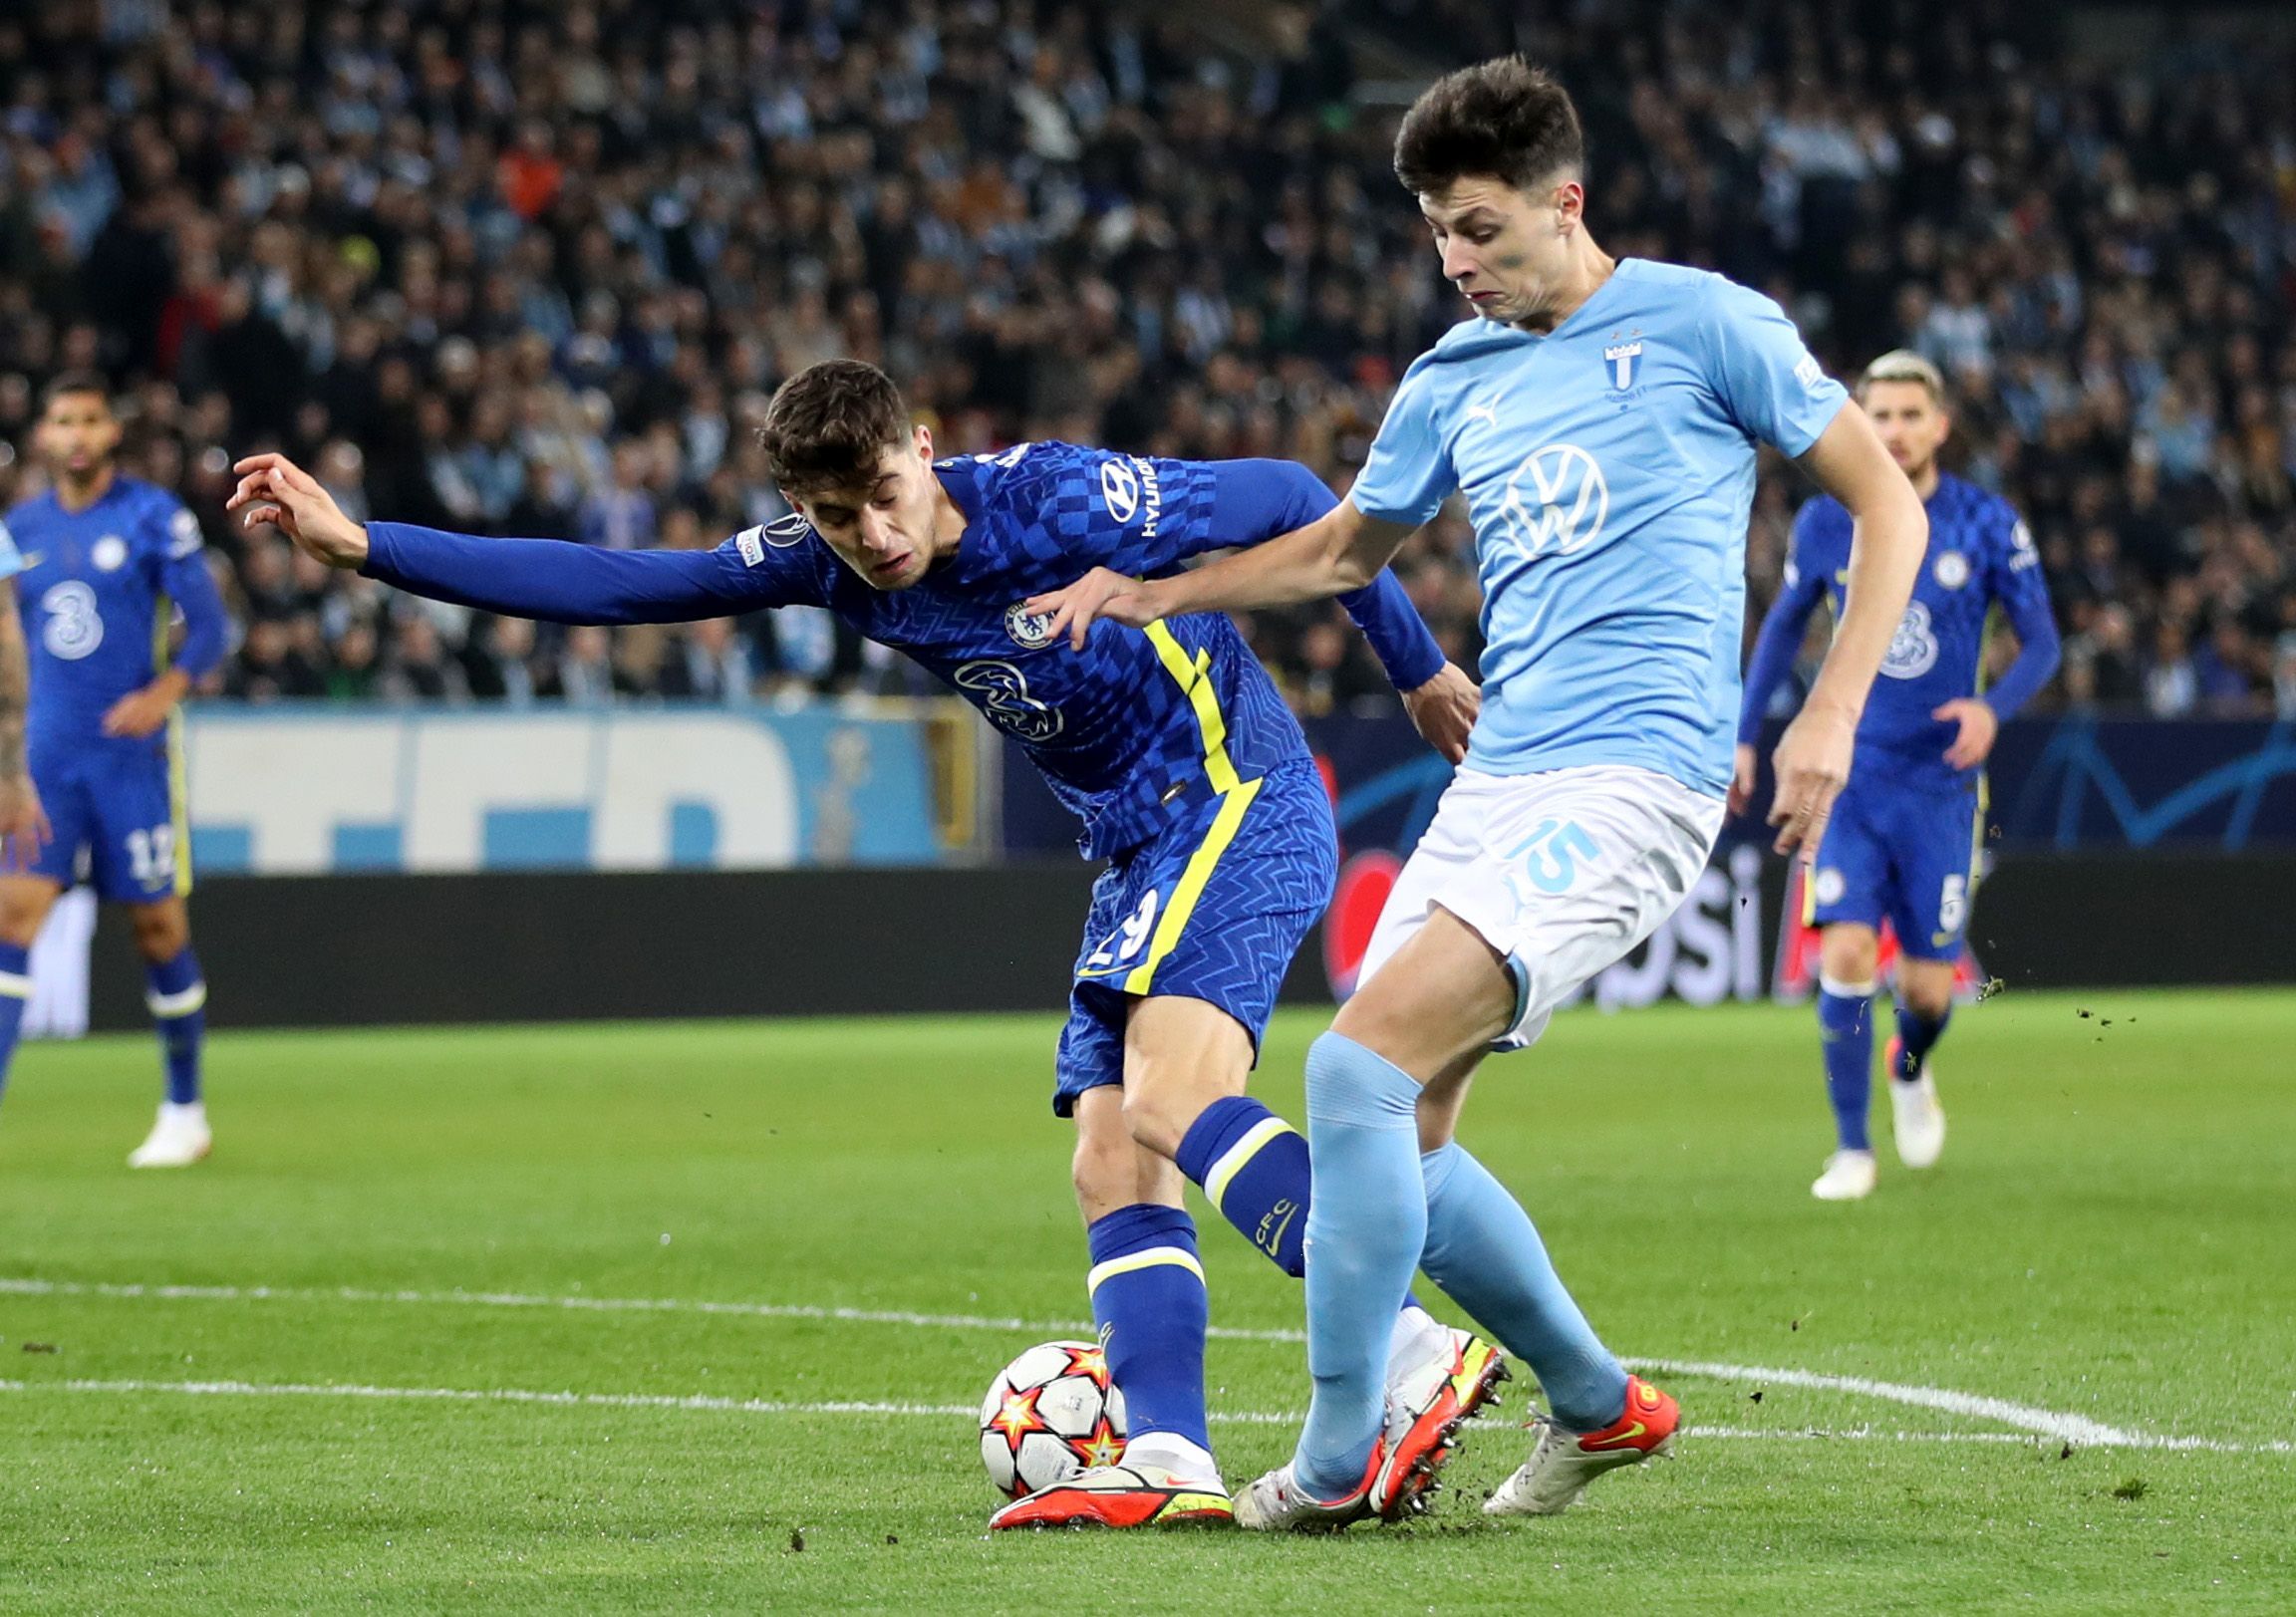 Chelsea's Kai Havertz in action with Malmo FF's Anel Ahmedhodzic Soccer Football - Champions League - Group H - Malmo FF v Chelsea - Eleda Stadion, Malmo, Sweden - November 2, 2021 Chelsea's Kai Havertz in action with Malmo FF's Anel Ahmedhodzic Action Images via Reuters/Carl Recine